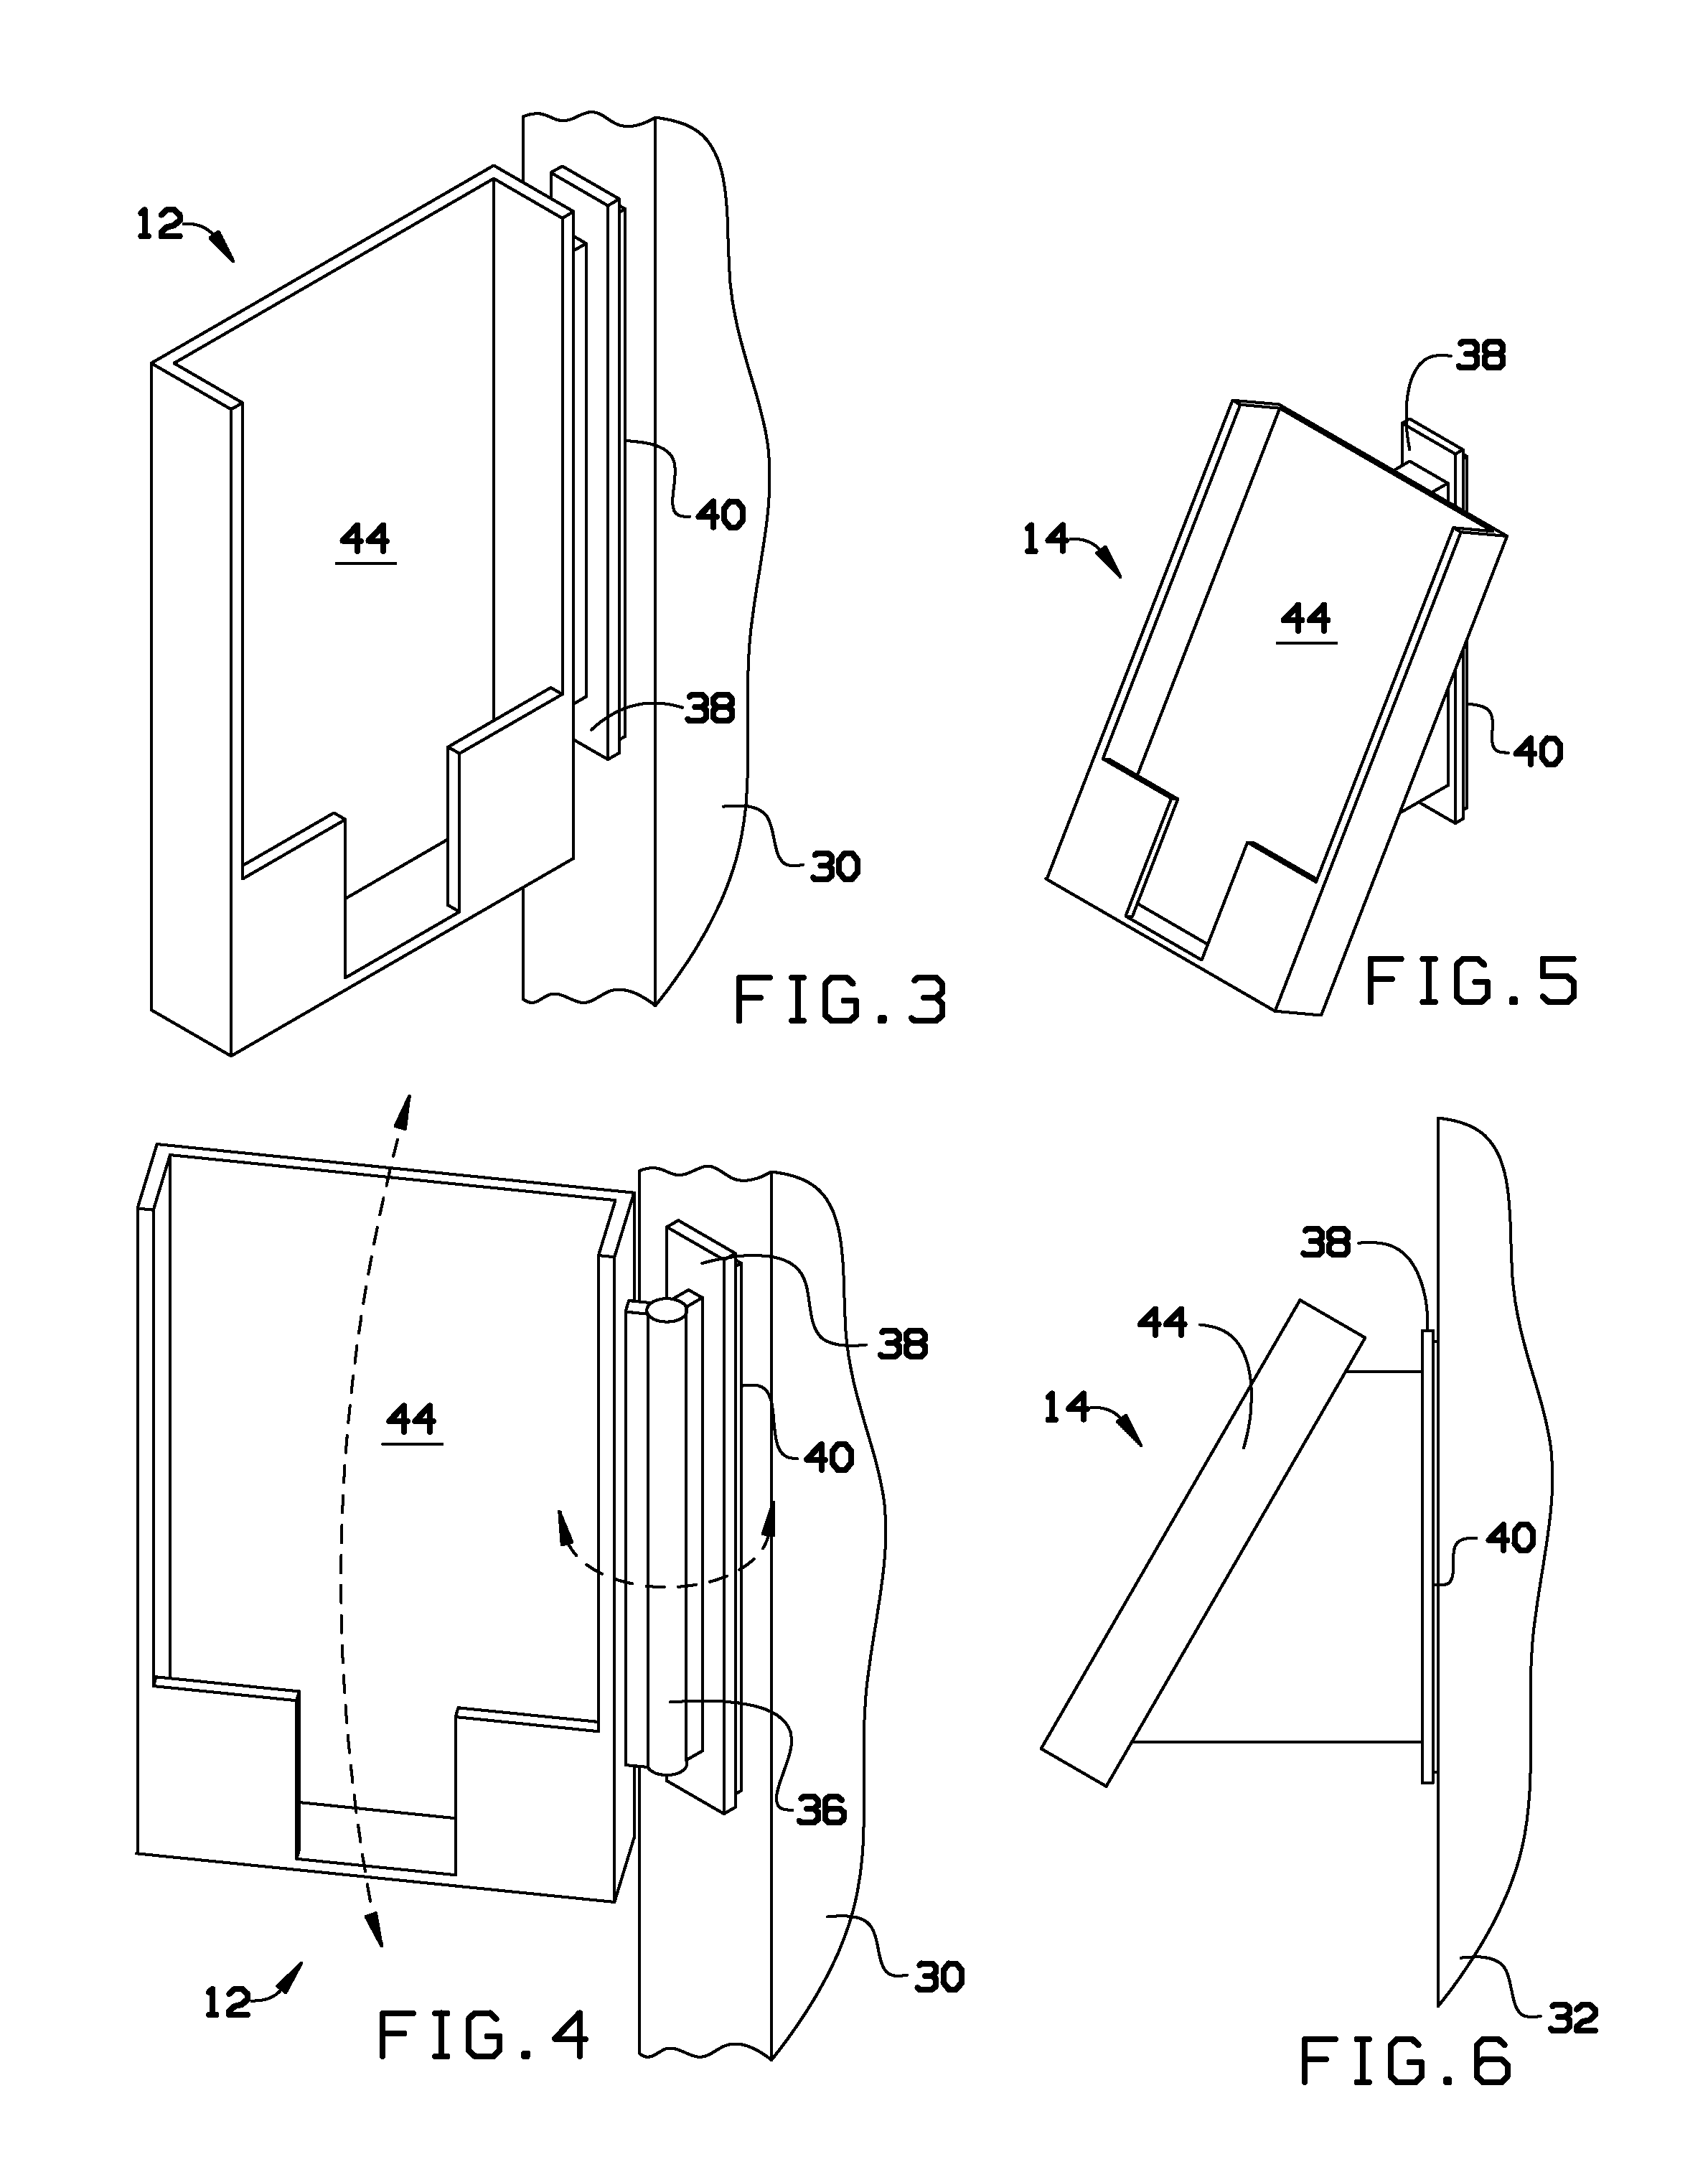 System for attaching accessories to a monitor